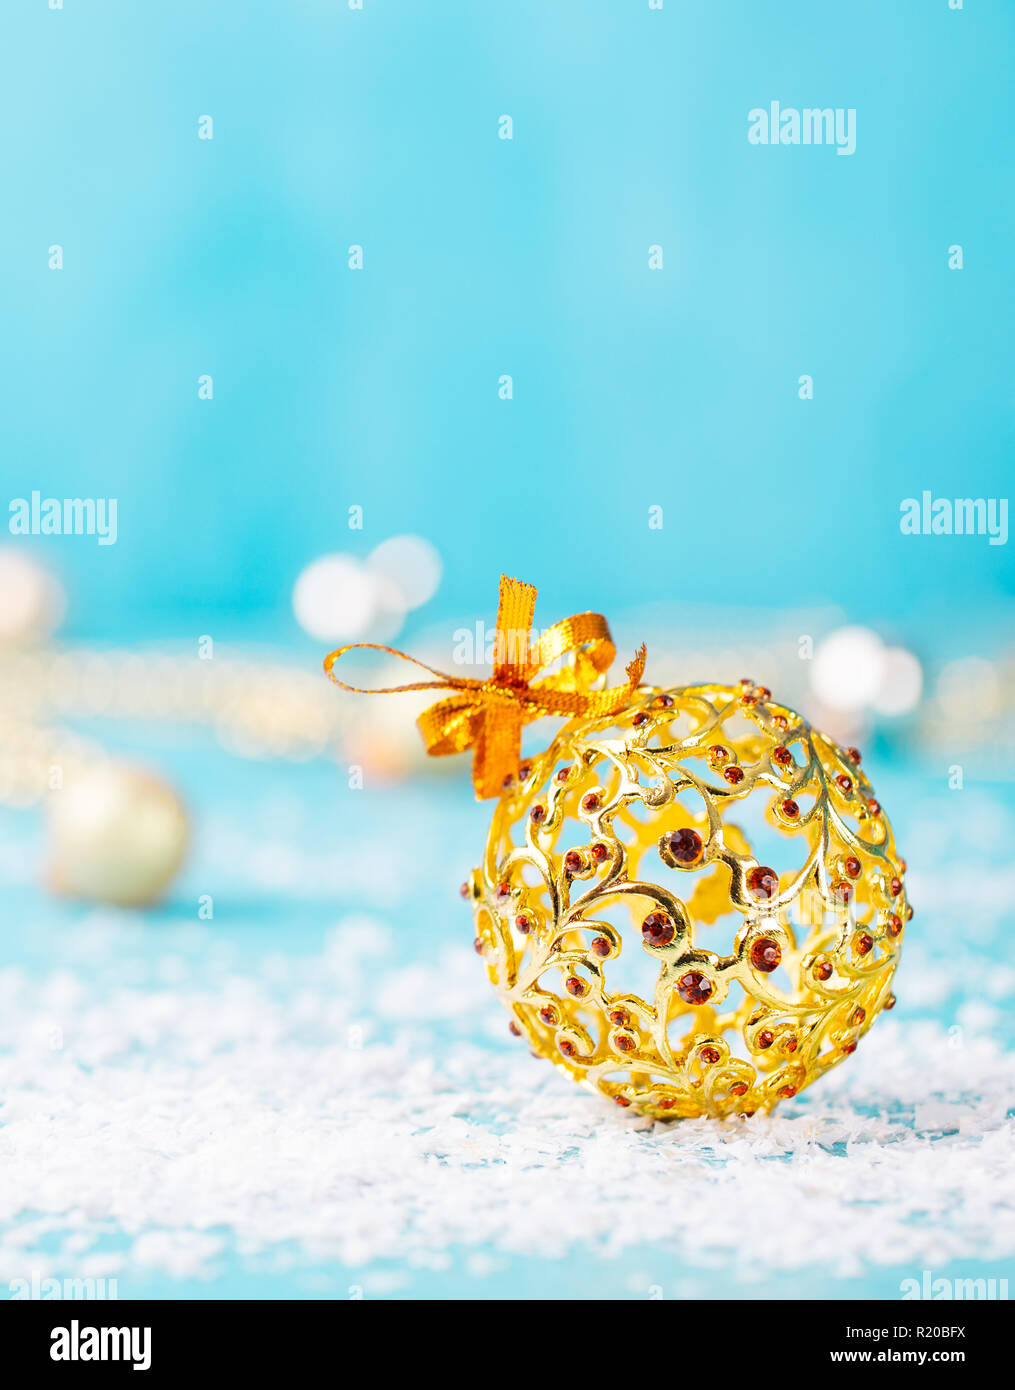 Christmas, New Year blue background with ball and snow decorations. Copy space. Stock Photo